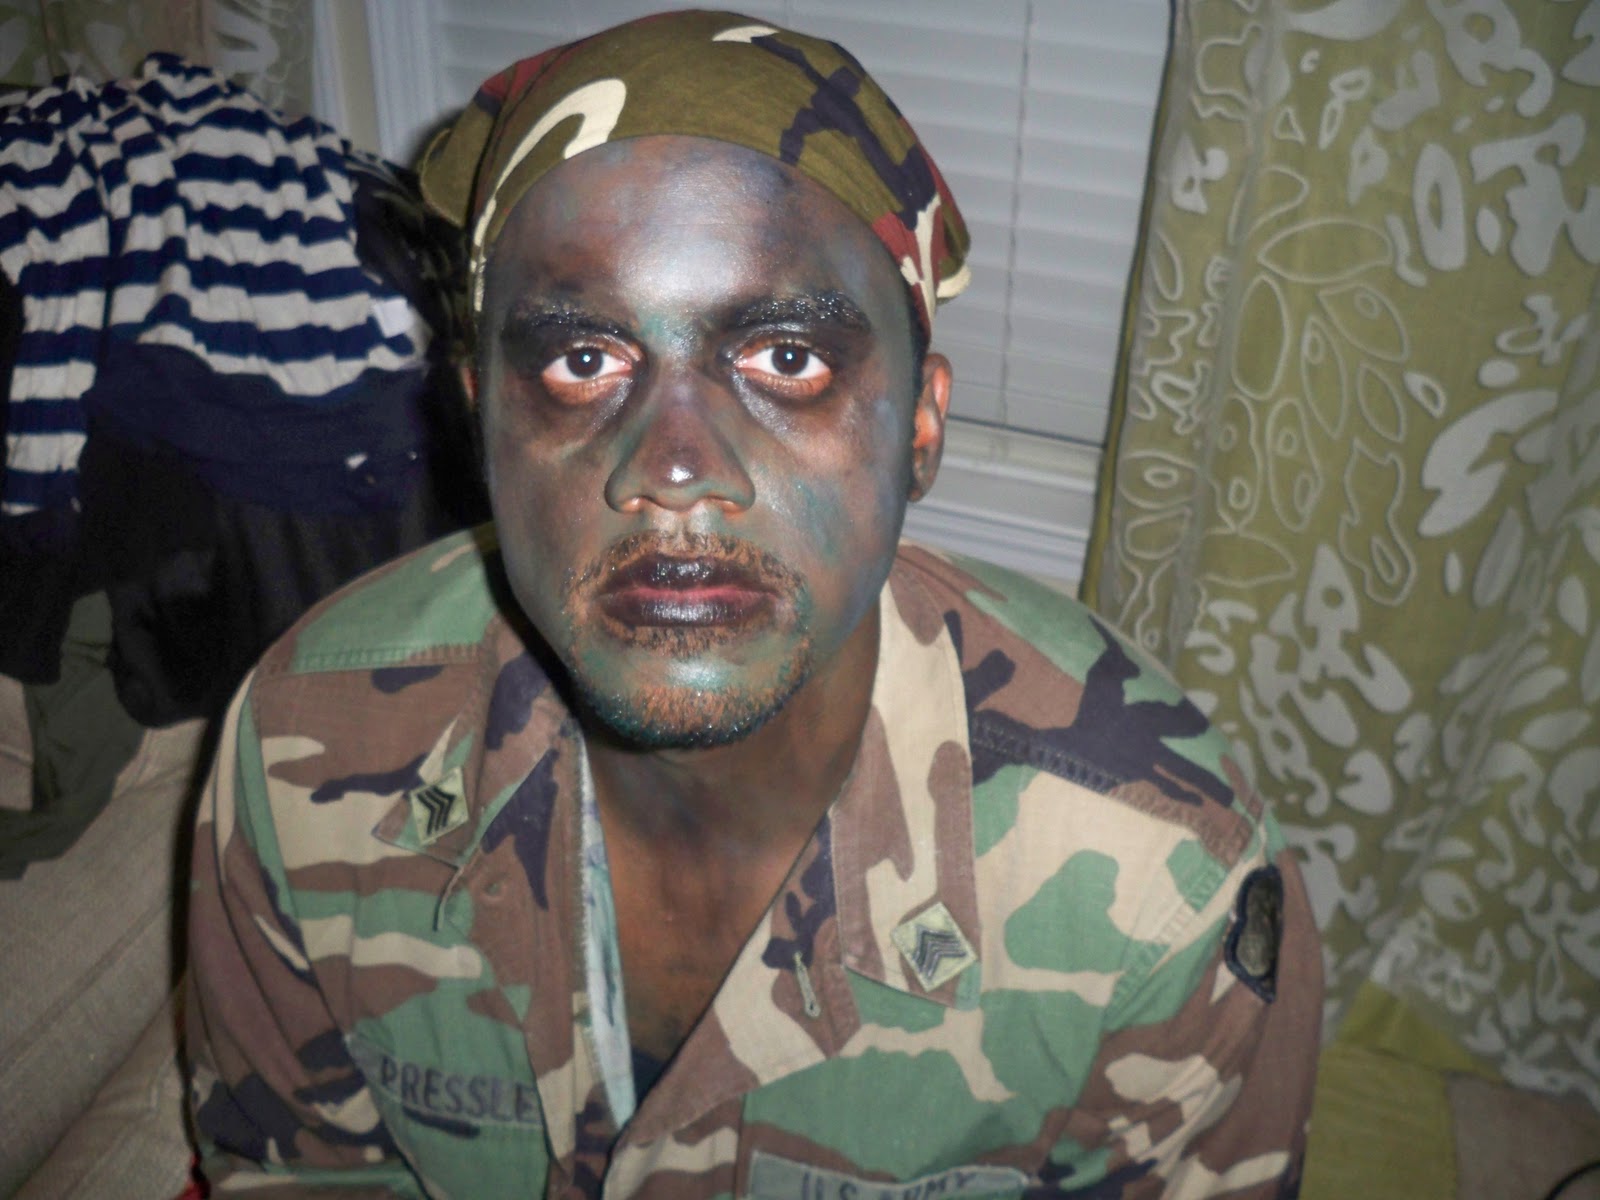 5 Photos That Prove Camo Face Paint is the Most Attractive Makeup